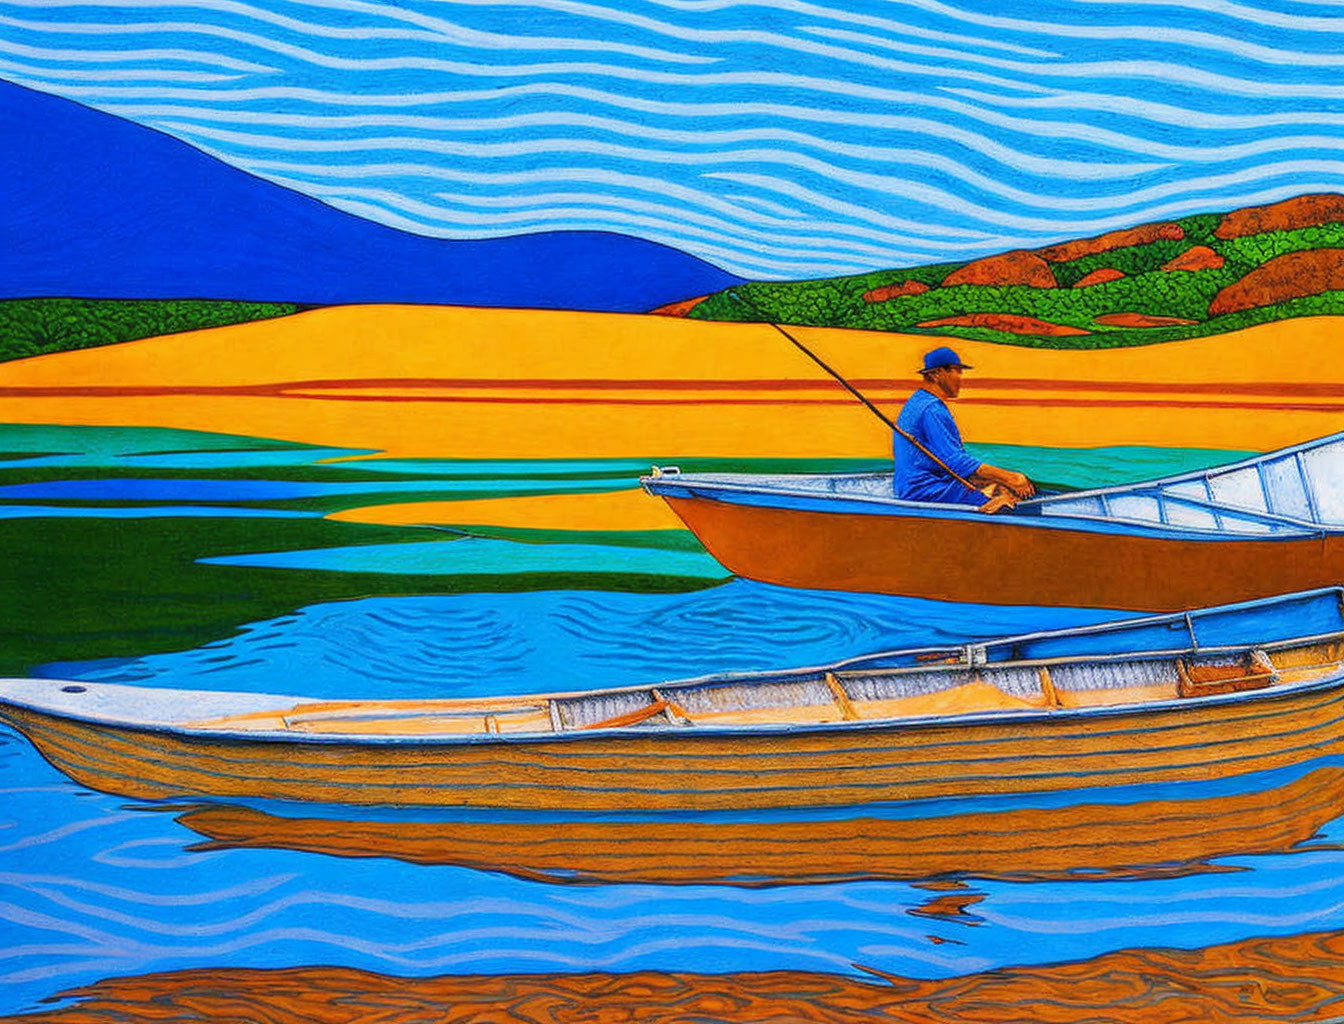 Colorful painting of person rowing boat on calm water with hills and blue sky